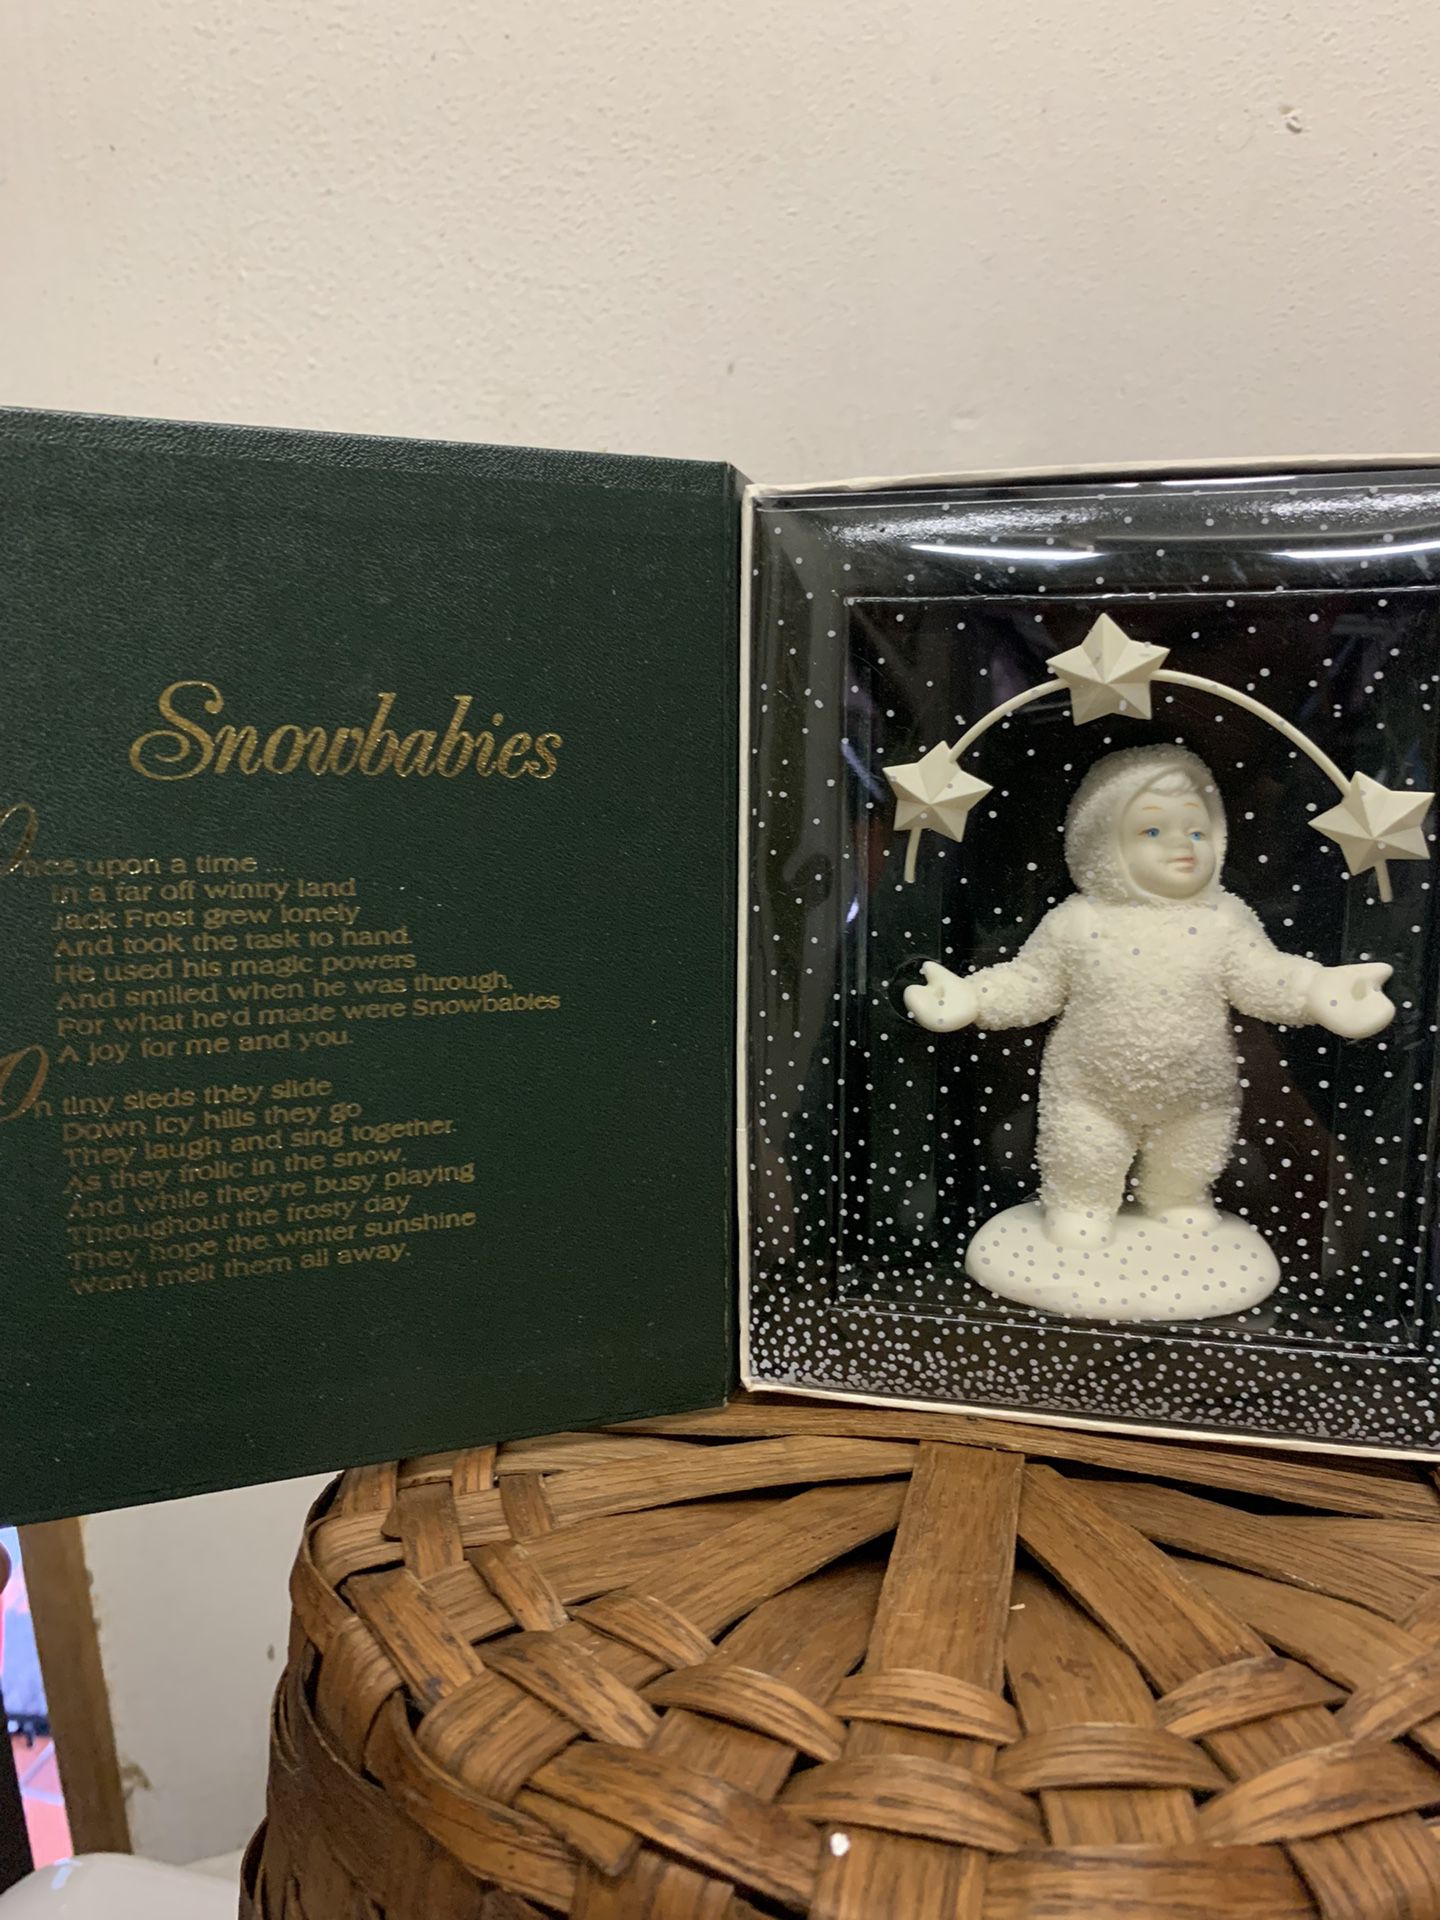 Snowbabies “Look What I Can Do” Nineteen Ninety Two To Nineteen Ninety Six